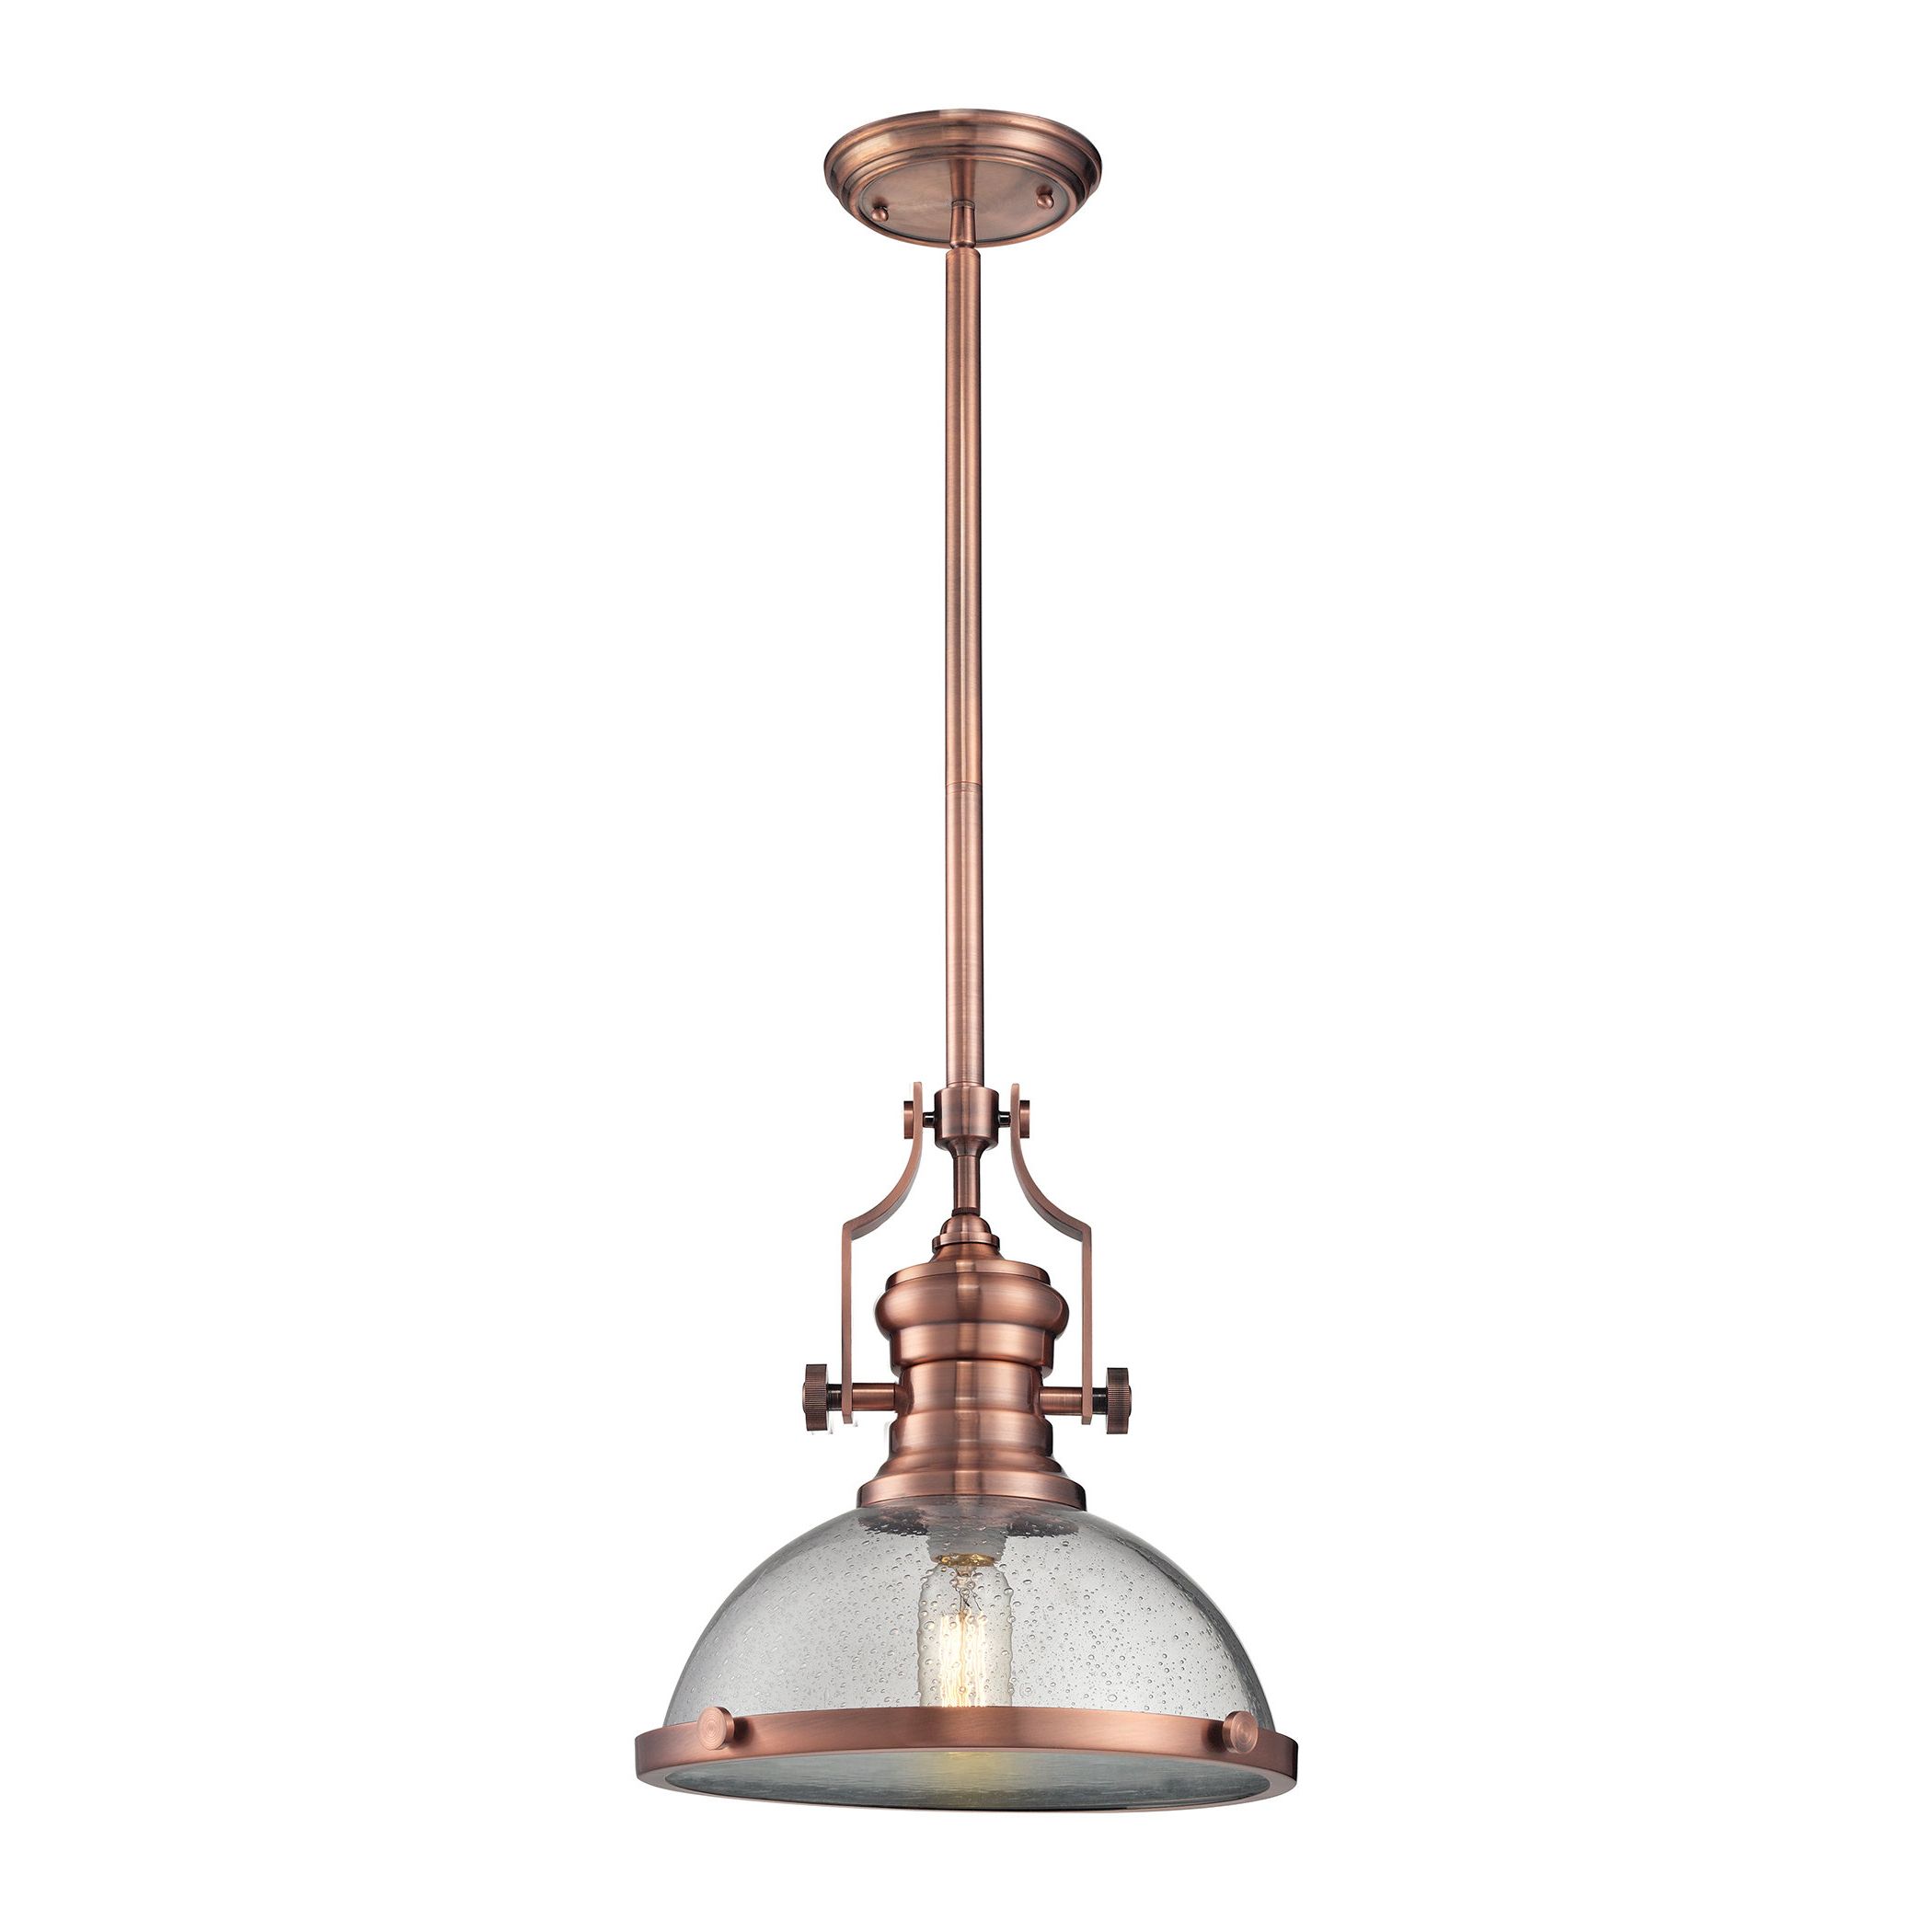 Widely Used Priston 1 Light Single Dome Pendant Within Bodalla 1 Light Single Dome Pendants (View 16 of 25)